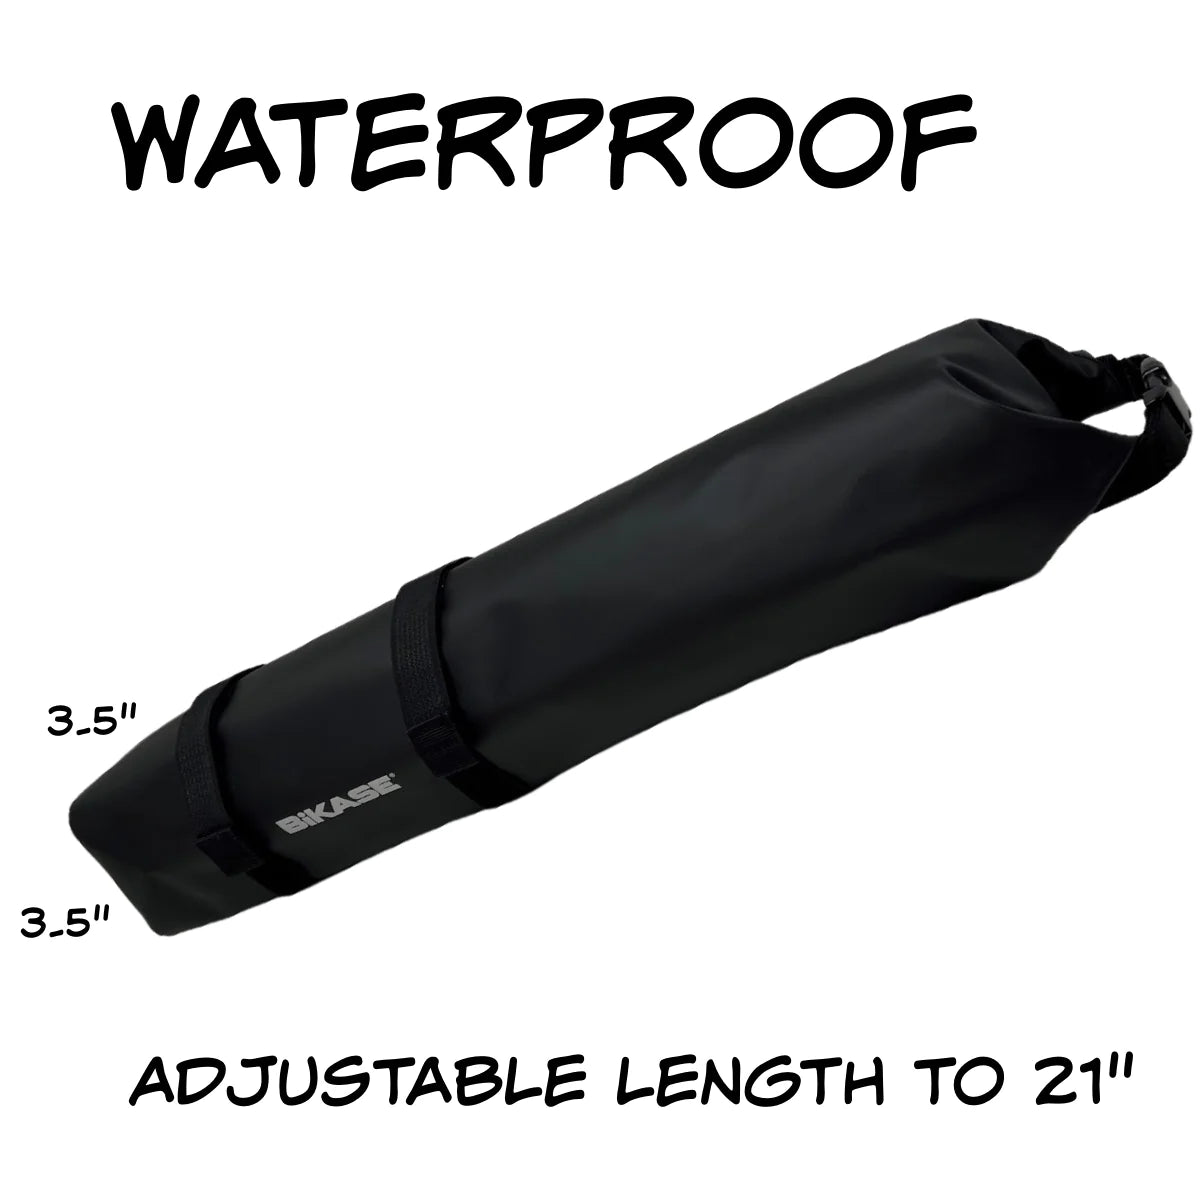 Ebike Battery Bag - Waterproof and flame resistant (Size Small)